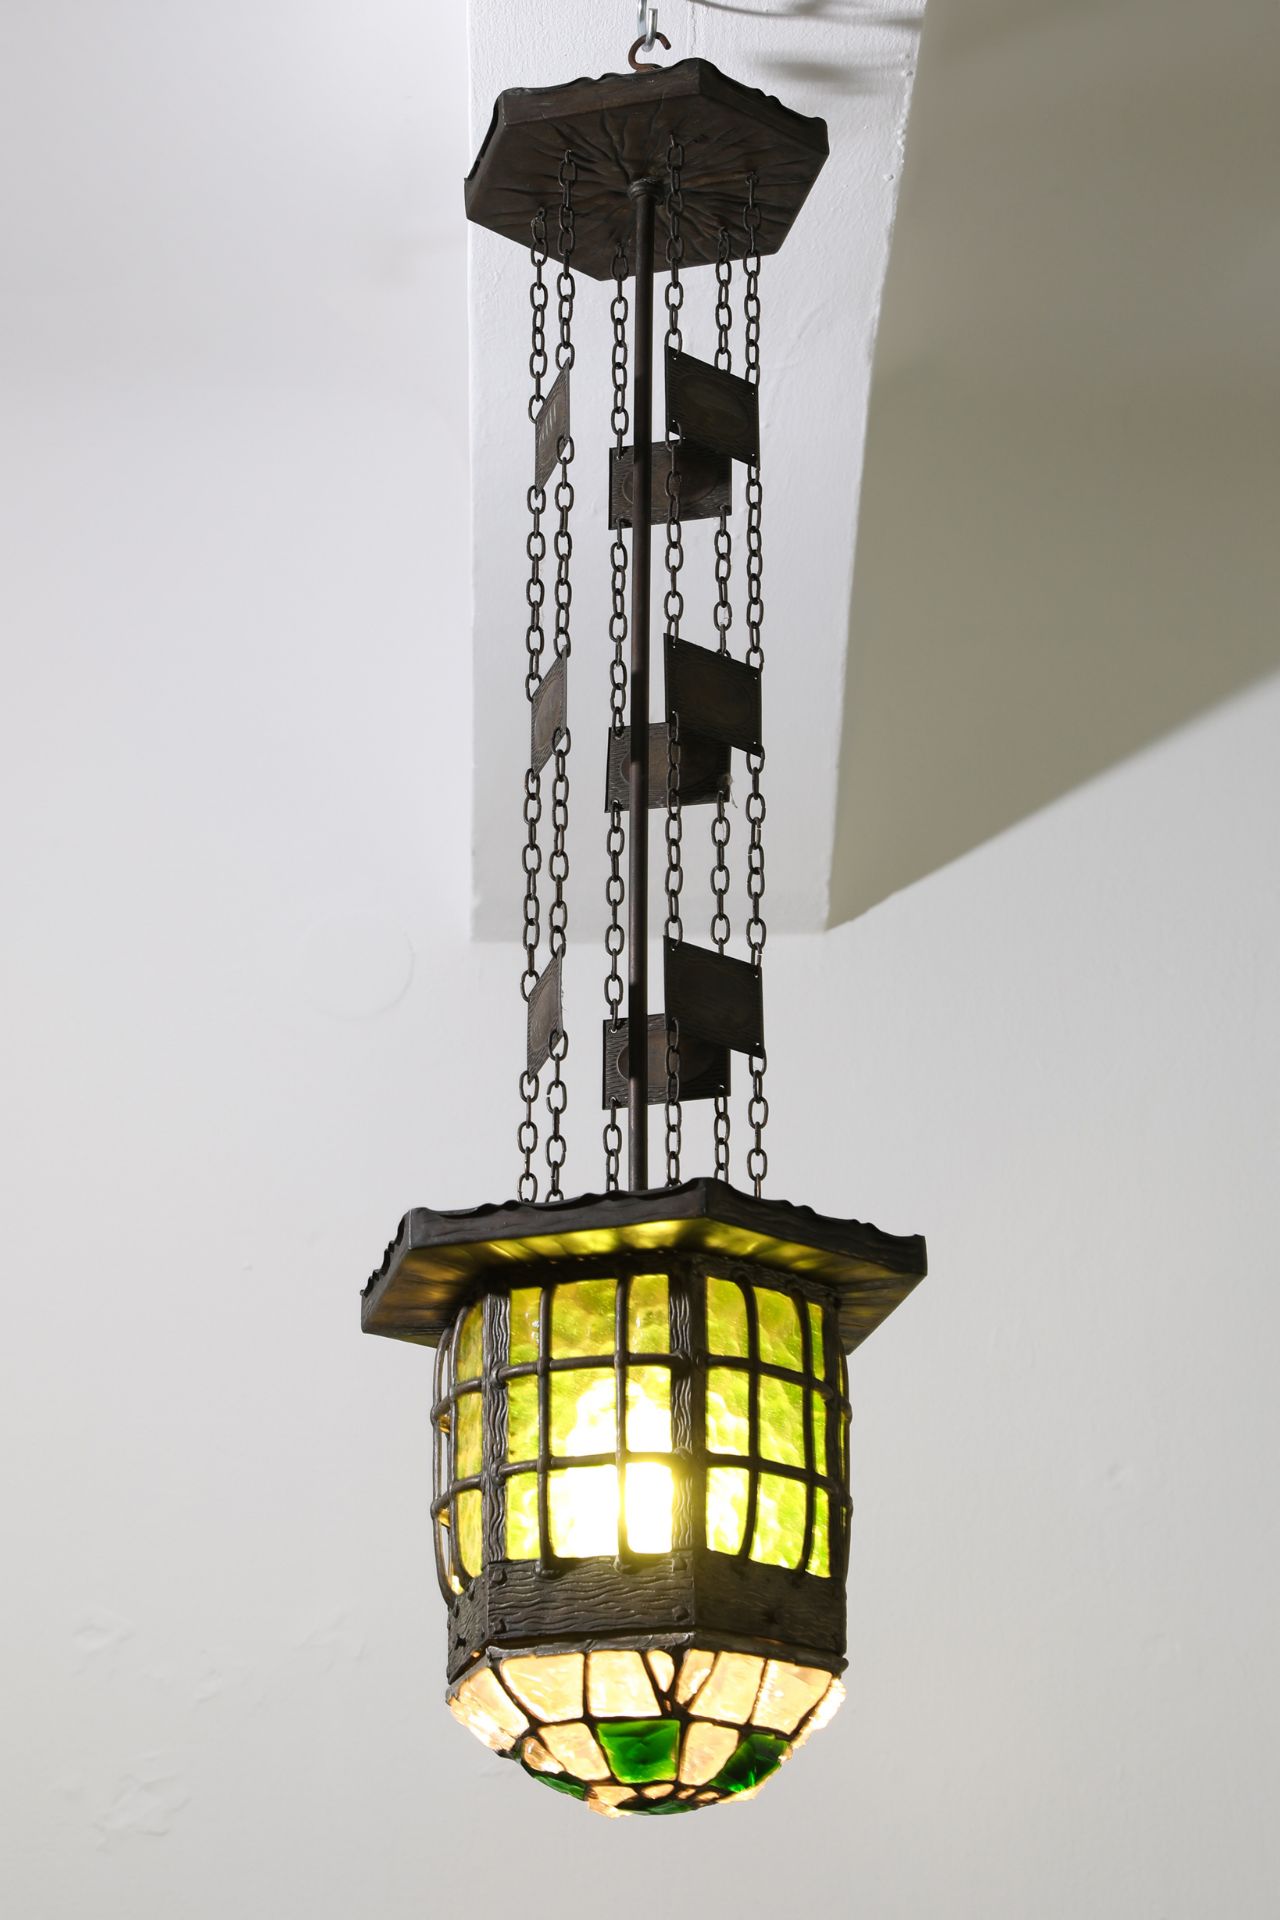 Art Nouveau hanging Lamp, metal, glass, probably Berlin around 1900 - Image 2 of 4